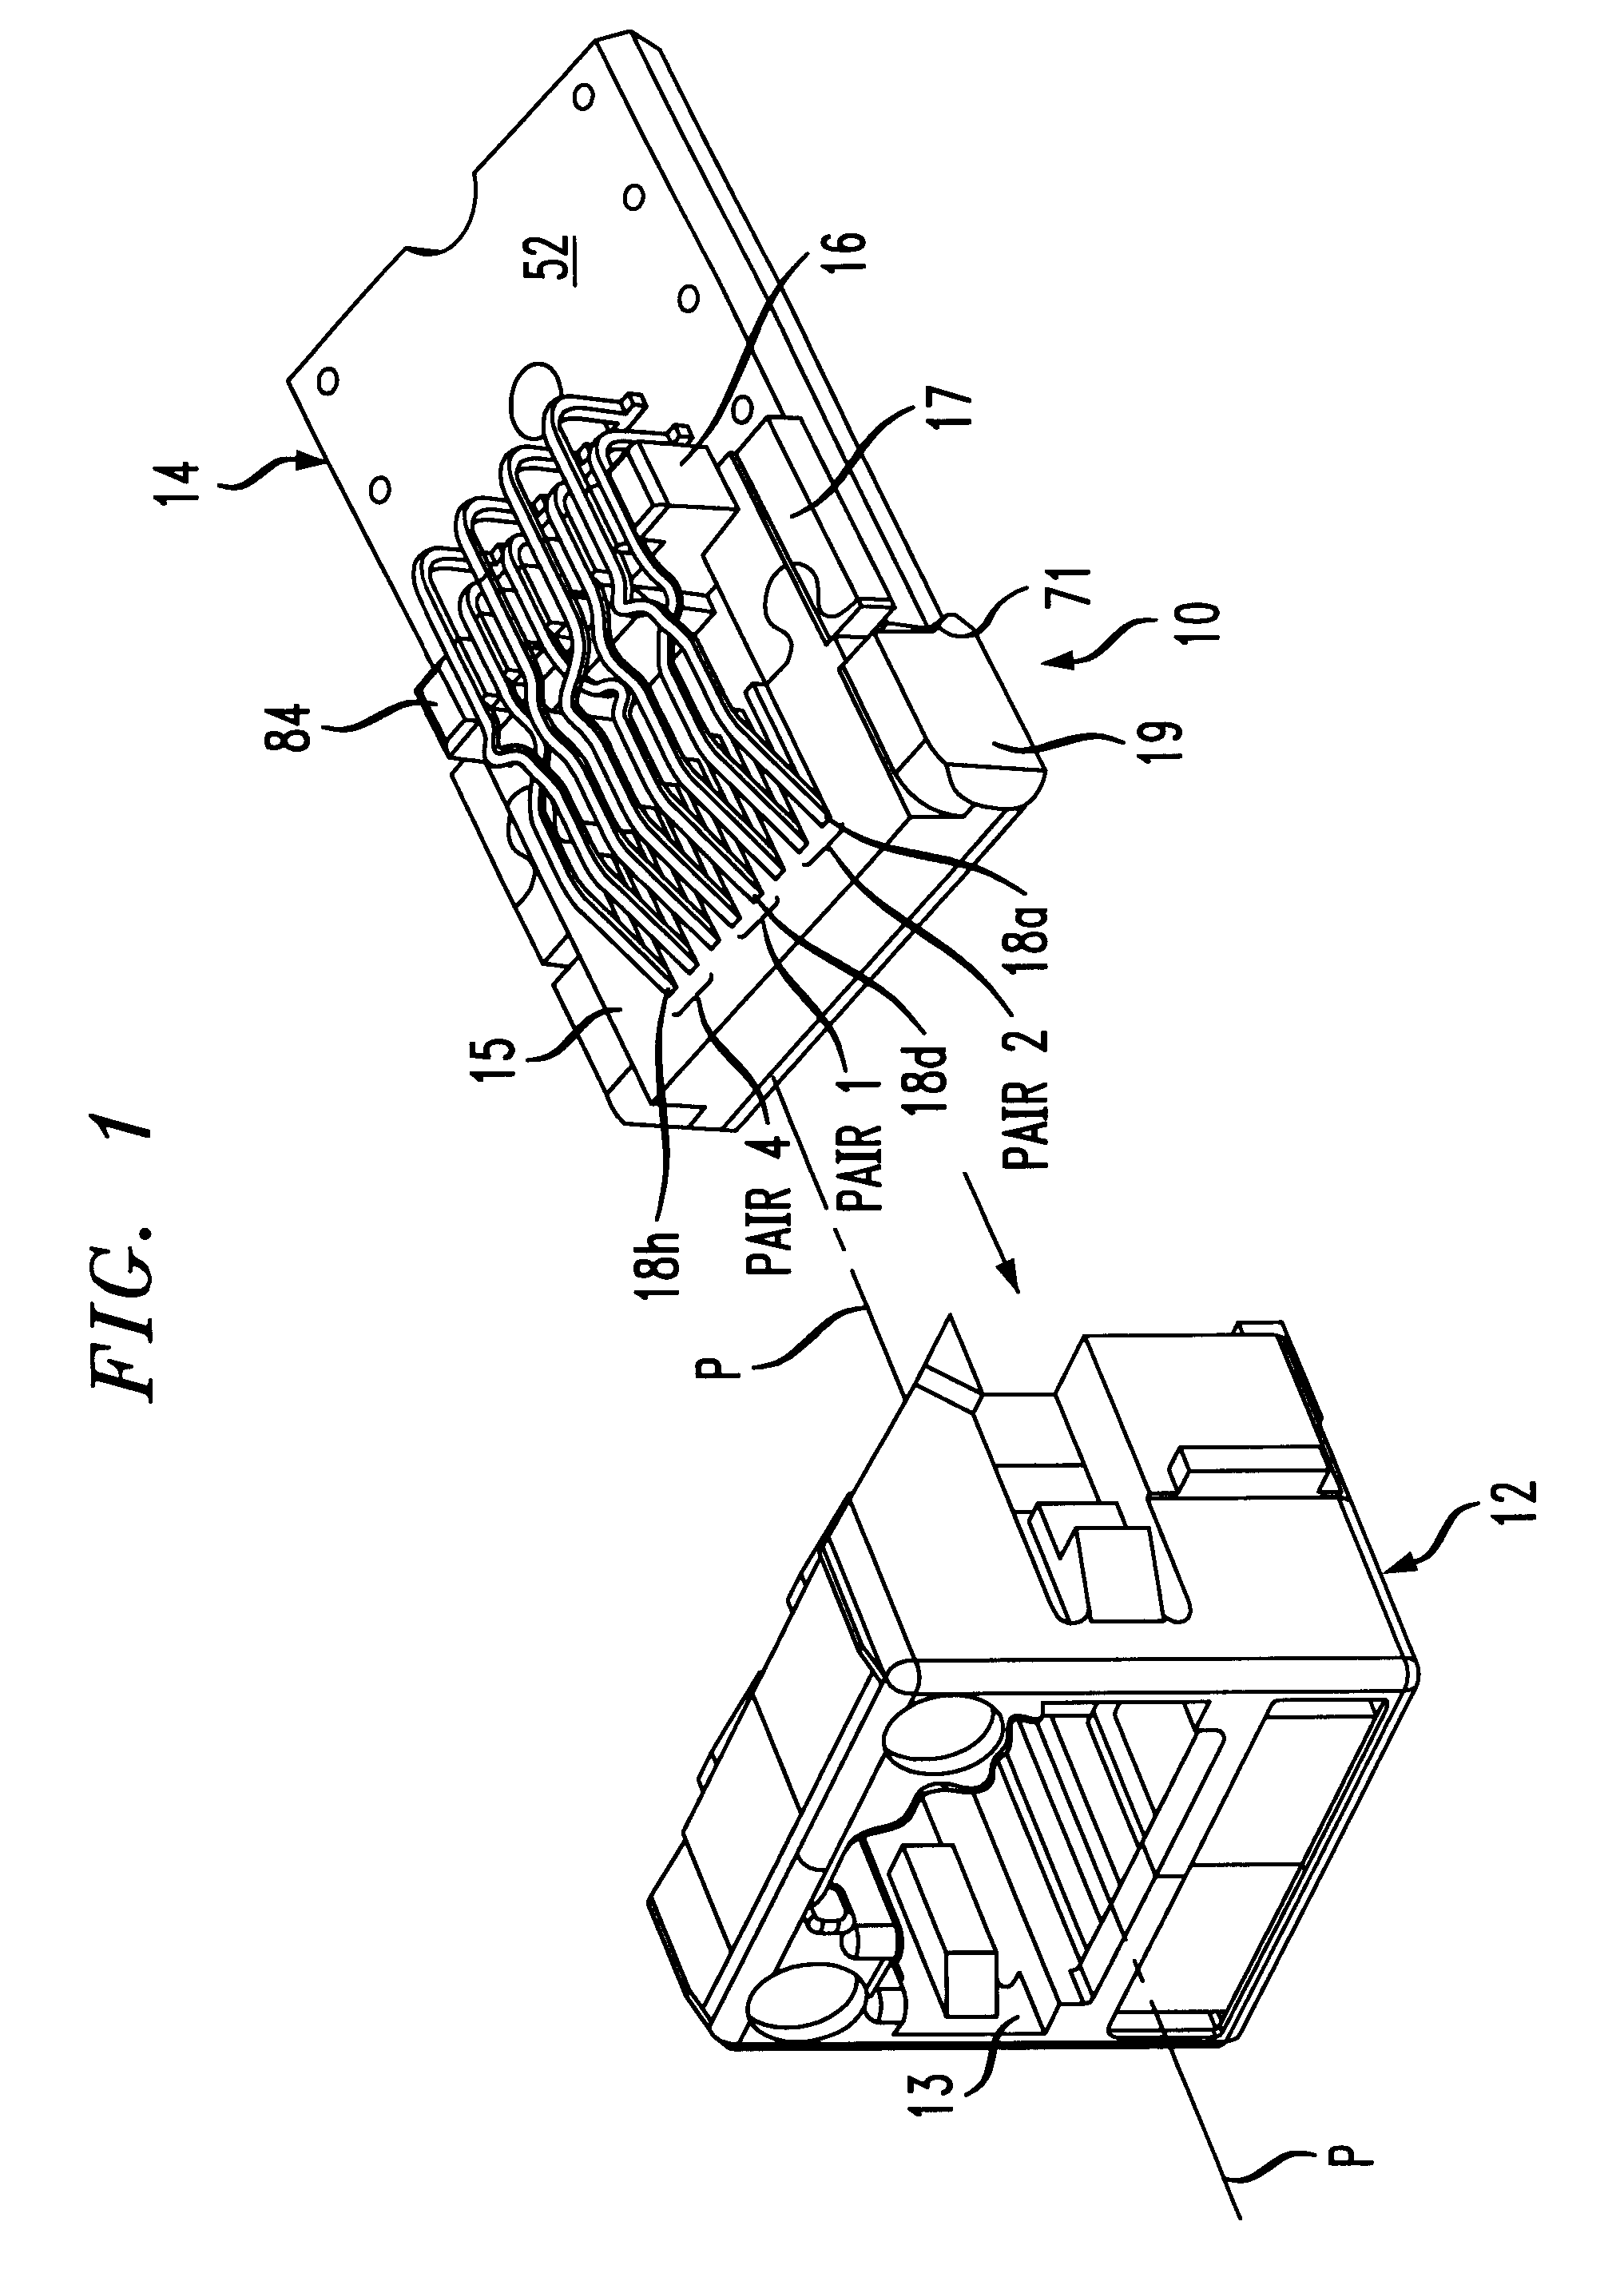 Enhanced communication connector assembly with crosstalk compensation